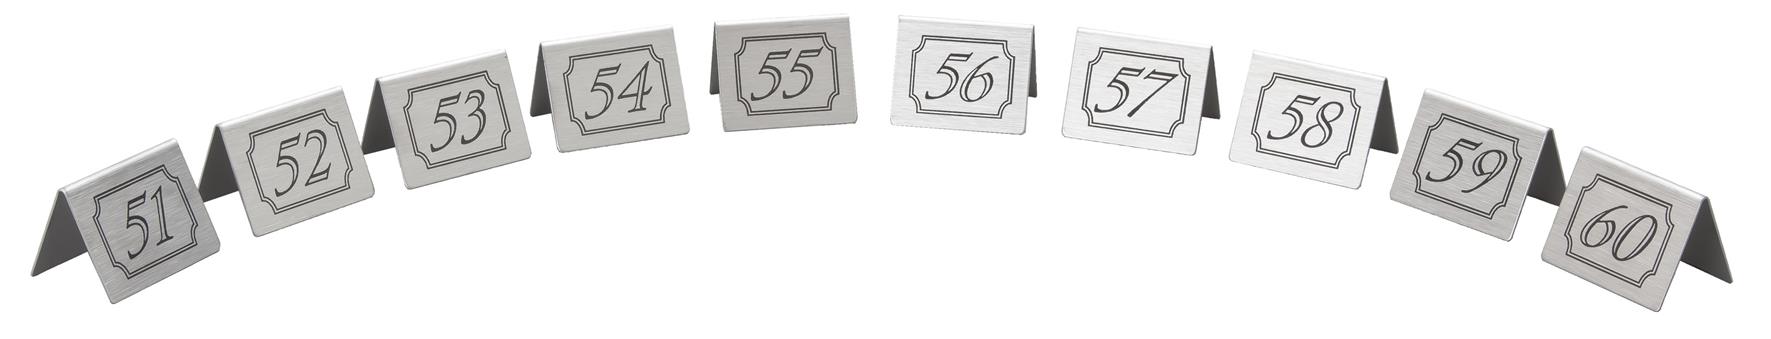 51-60 Table Numbers Stainless Steel (Each) 51-60, Table, Numbers, Stainless, Steel, Beaumont